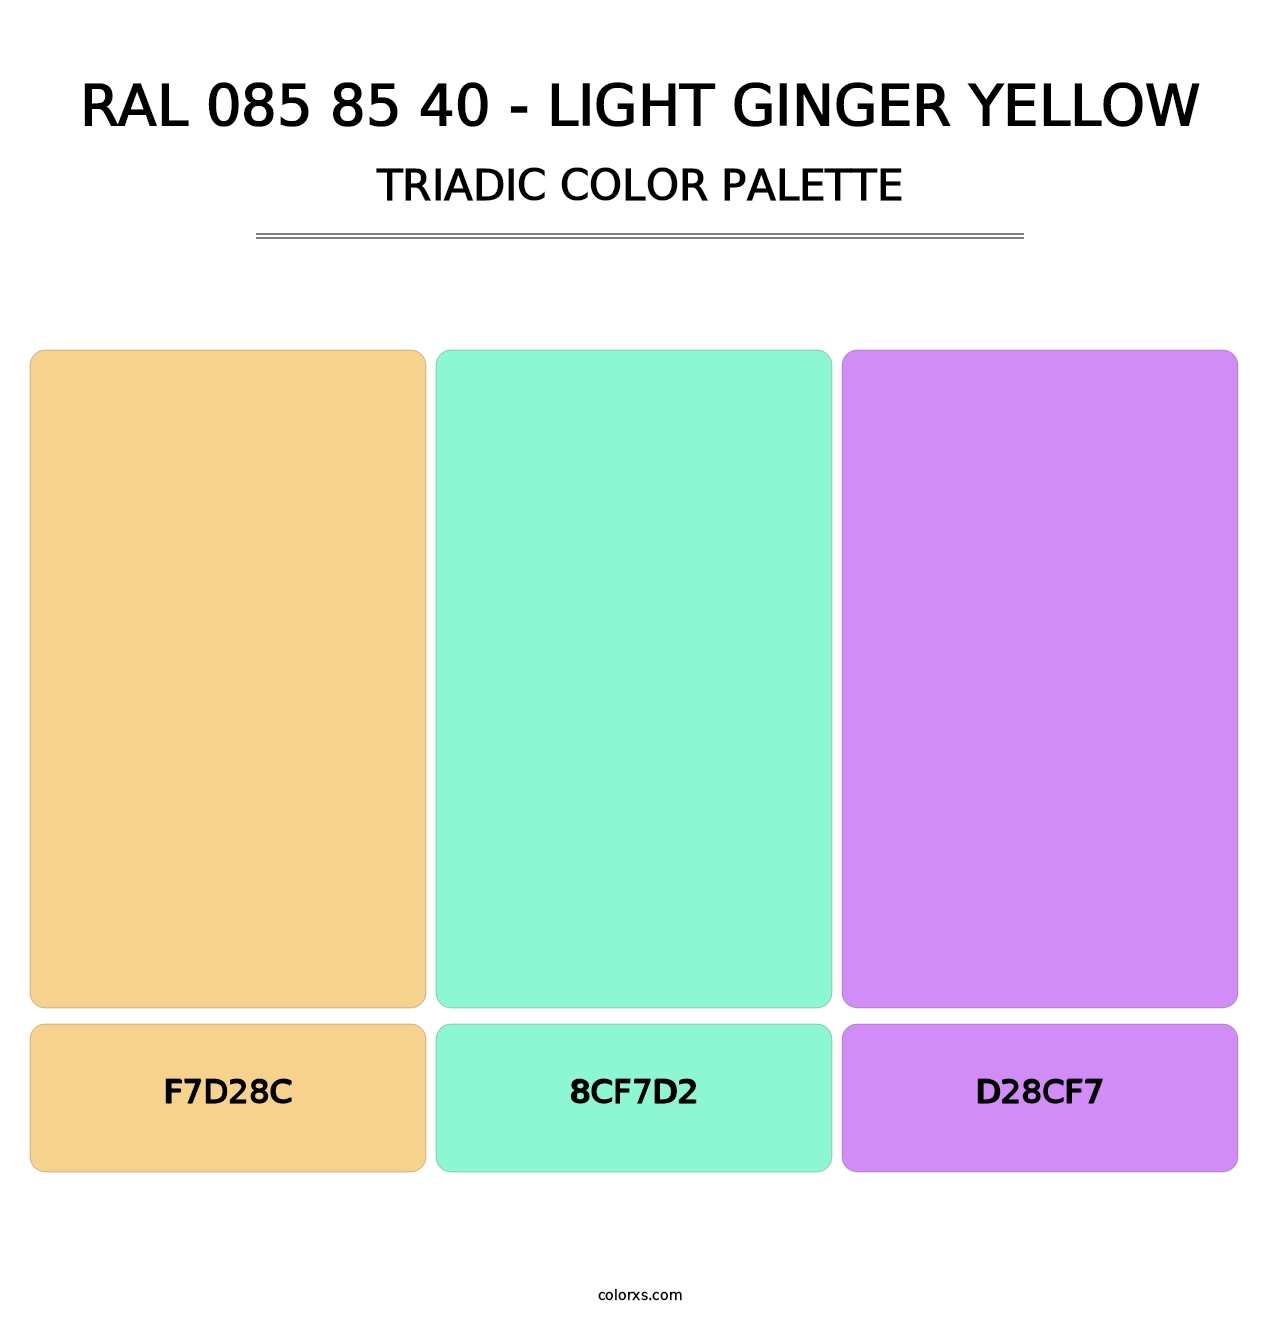 RAL 085 85 40 - Light Ginger Yellow - Triadic Color Palette